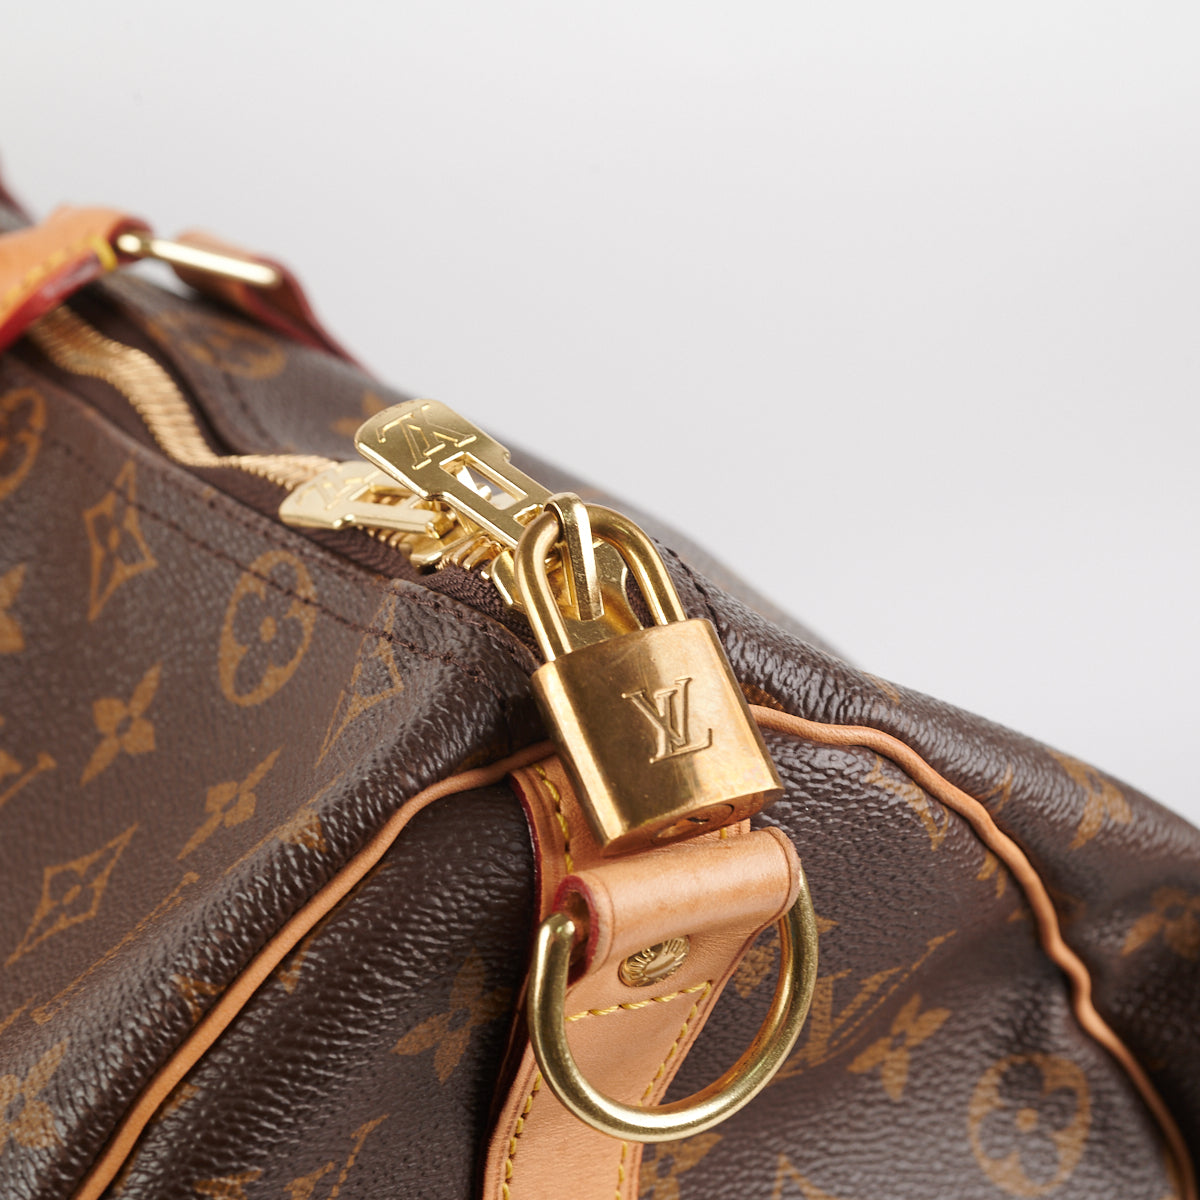 Shop Louis Vuitton Keepall Keepall bandoulière 45 (M45532) by CATSUSELECT